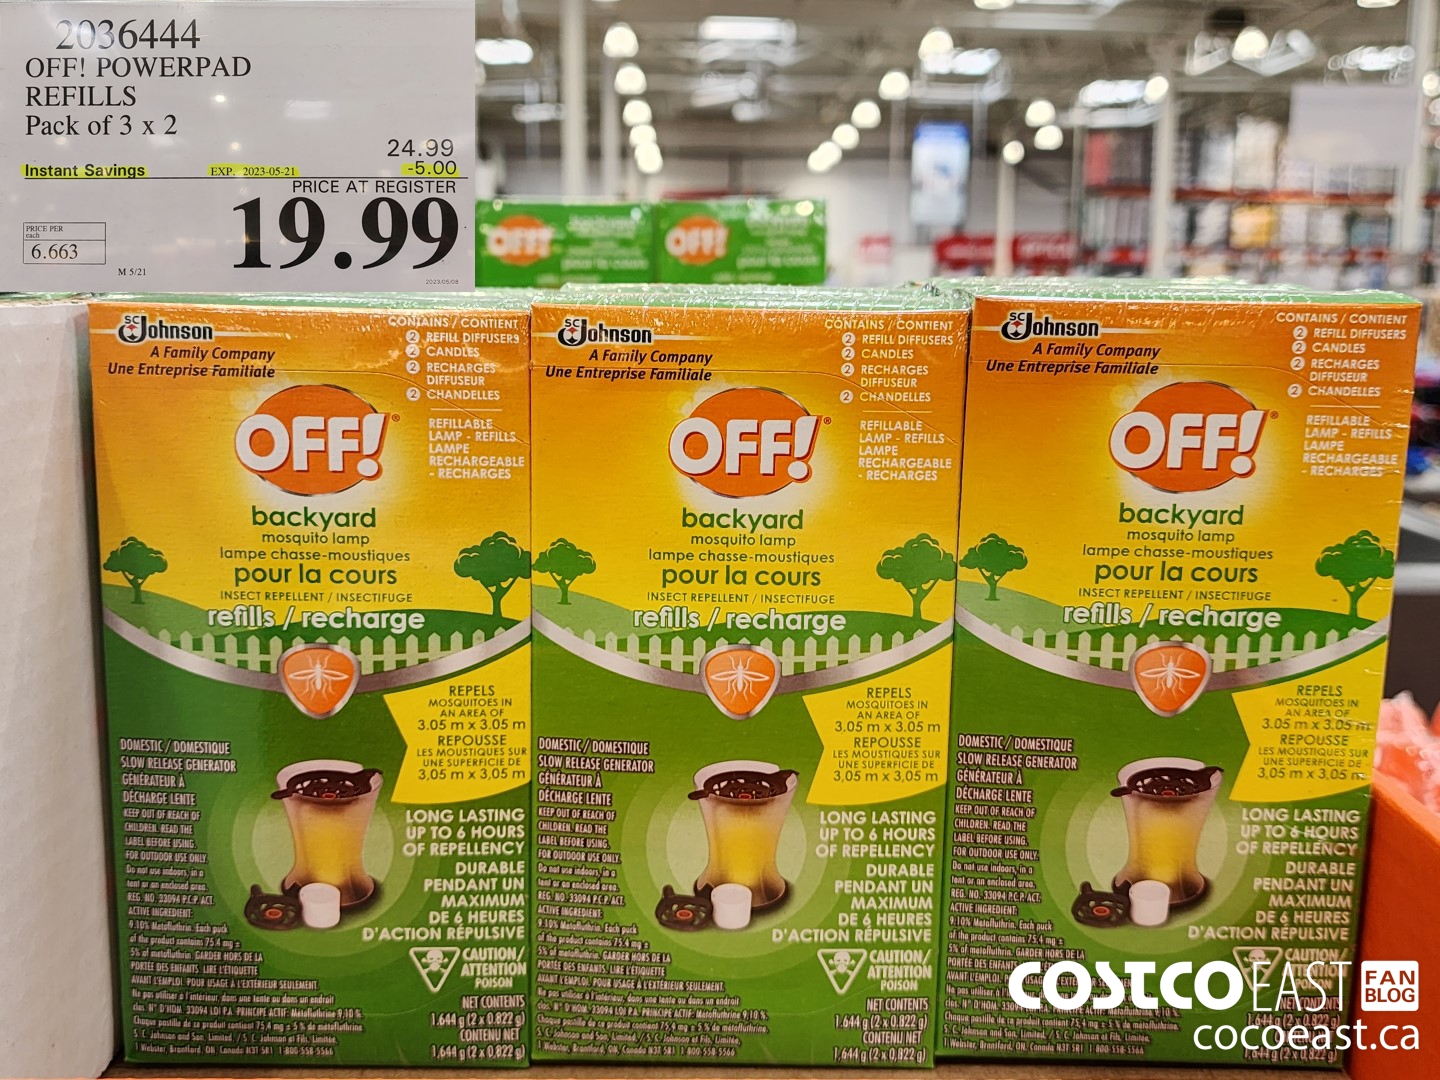 1363859 DURACELL LED LANTERN PACK OF 2 19 99 - Costco East Fan Blog